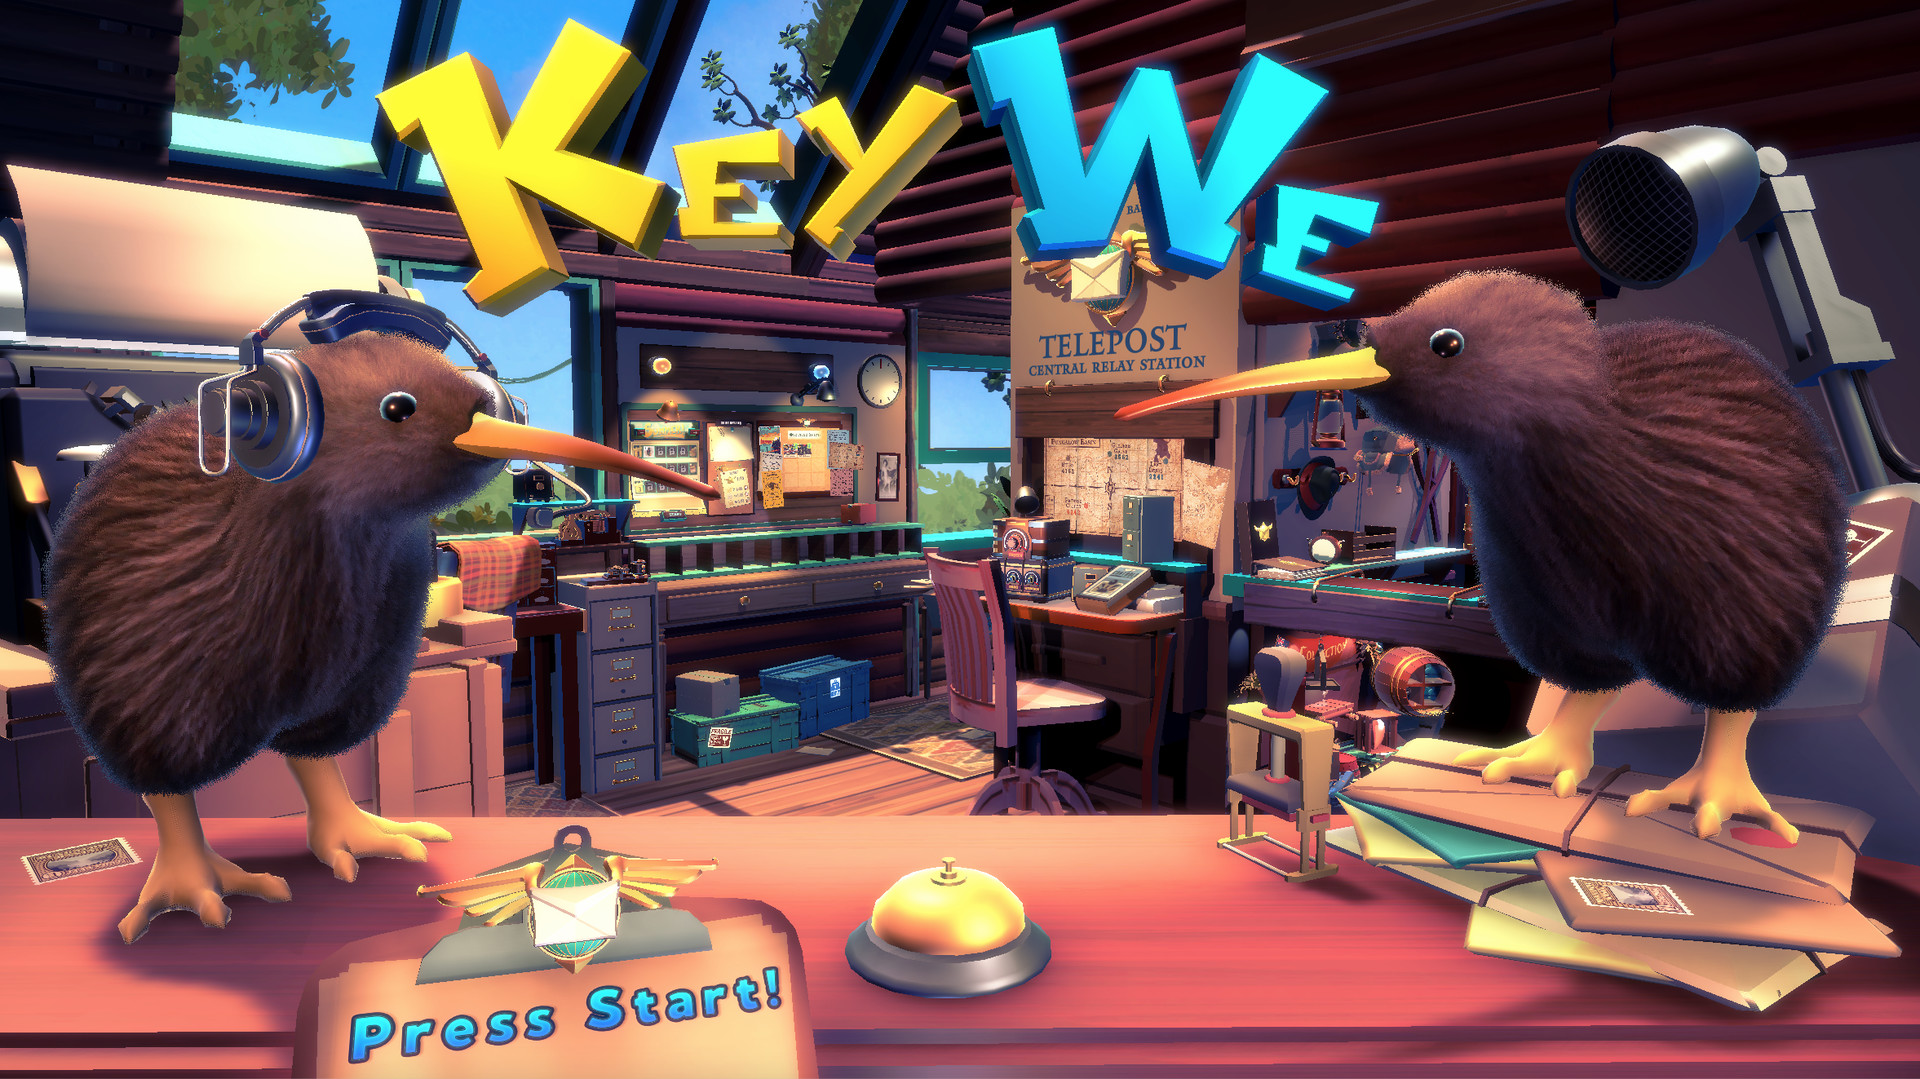 KeyWe Delivers Cute Co-Op Fun on August 31st for PS5, PS4